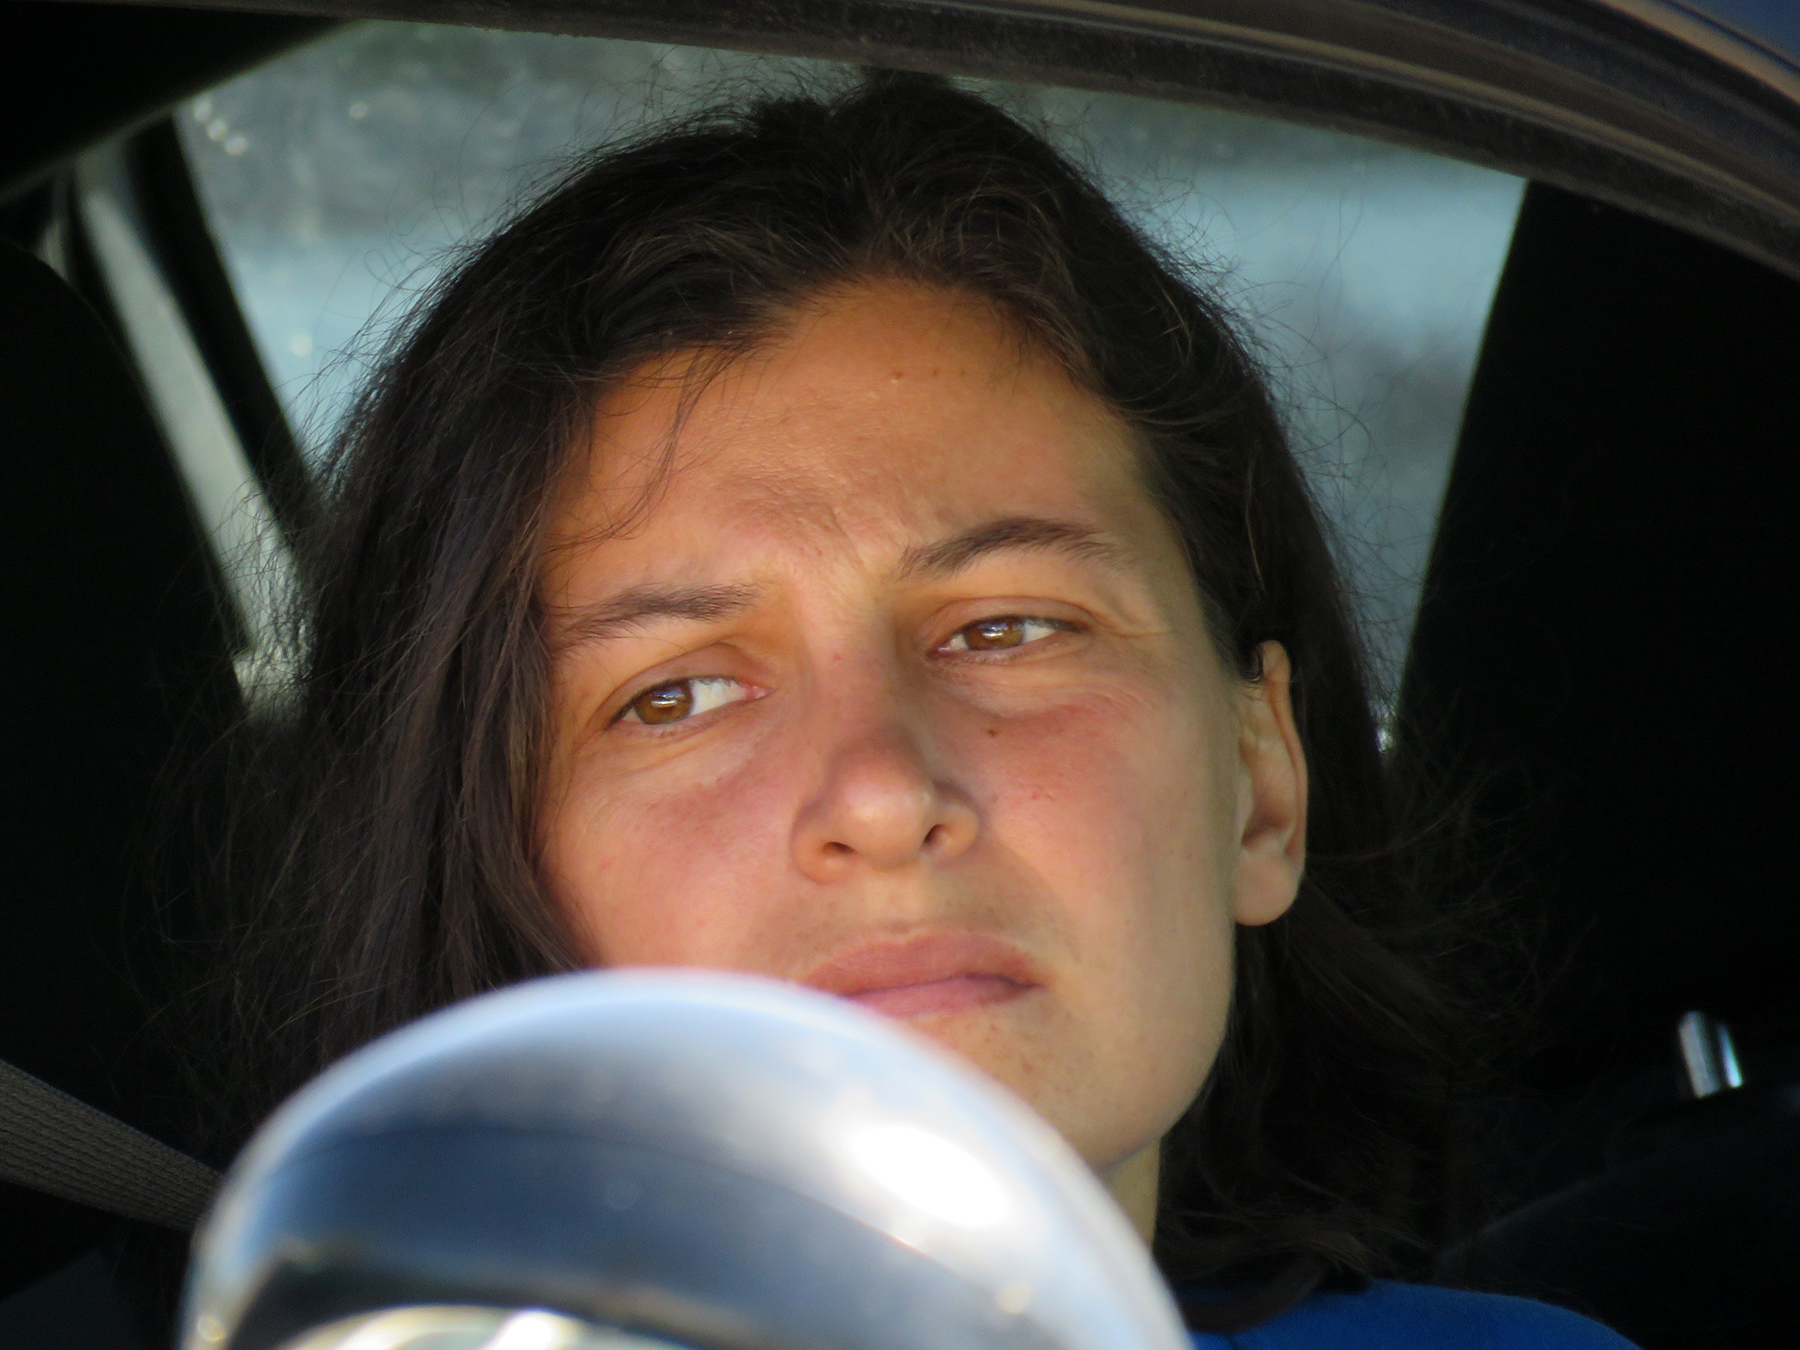 A close-up of Ruby Montoya (a woman with long brown hair) looking somber while sitting inside a vehicle